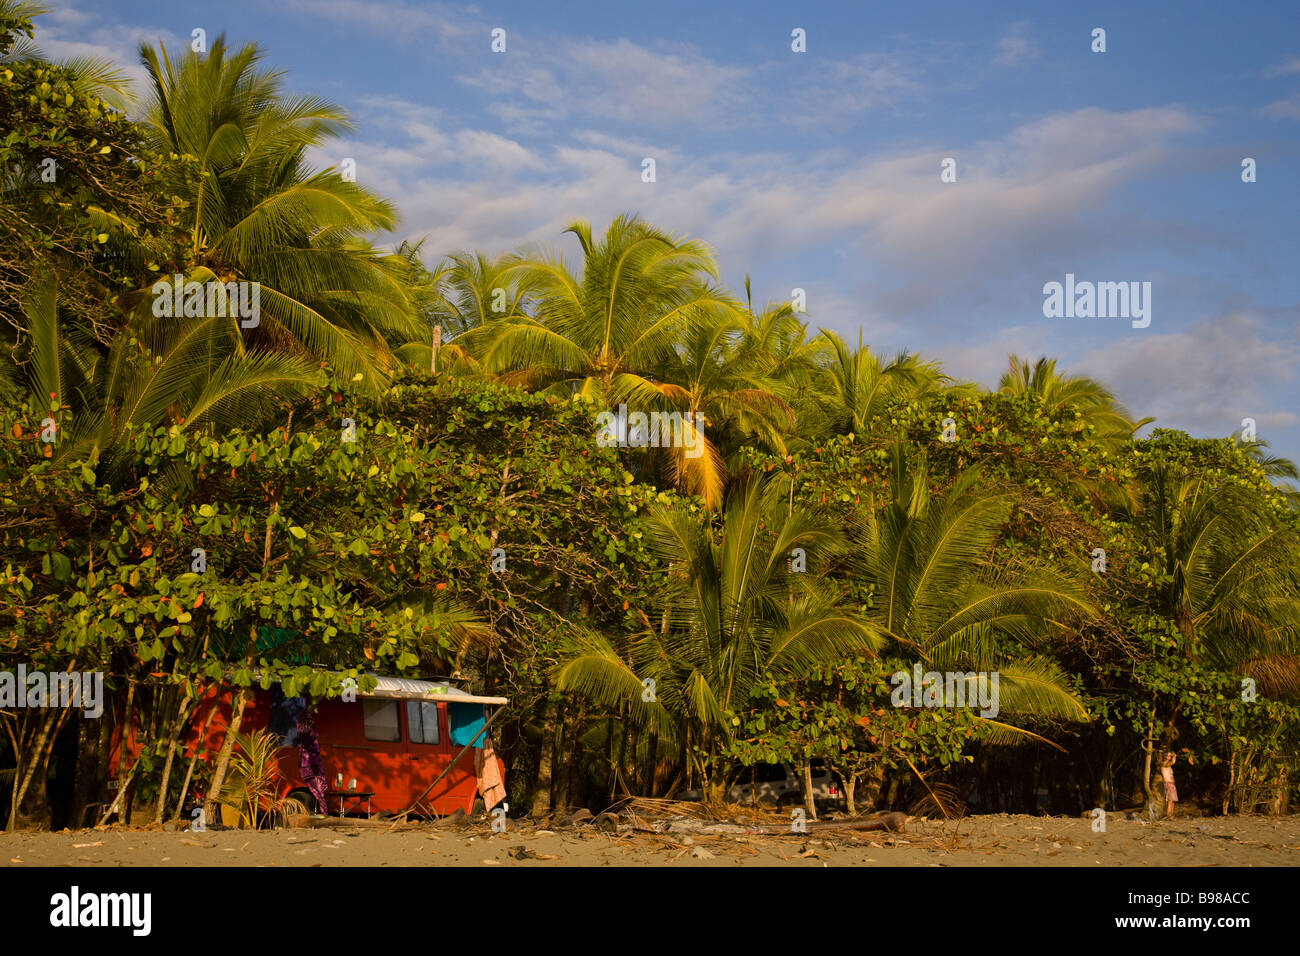 Orange Volkswagen van camping along the beach with palm trees in Dominical, Costa Rica. Stock Photo